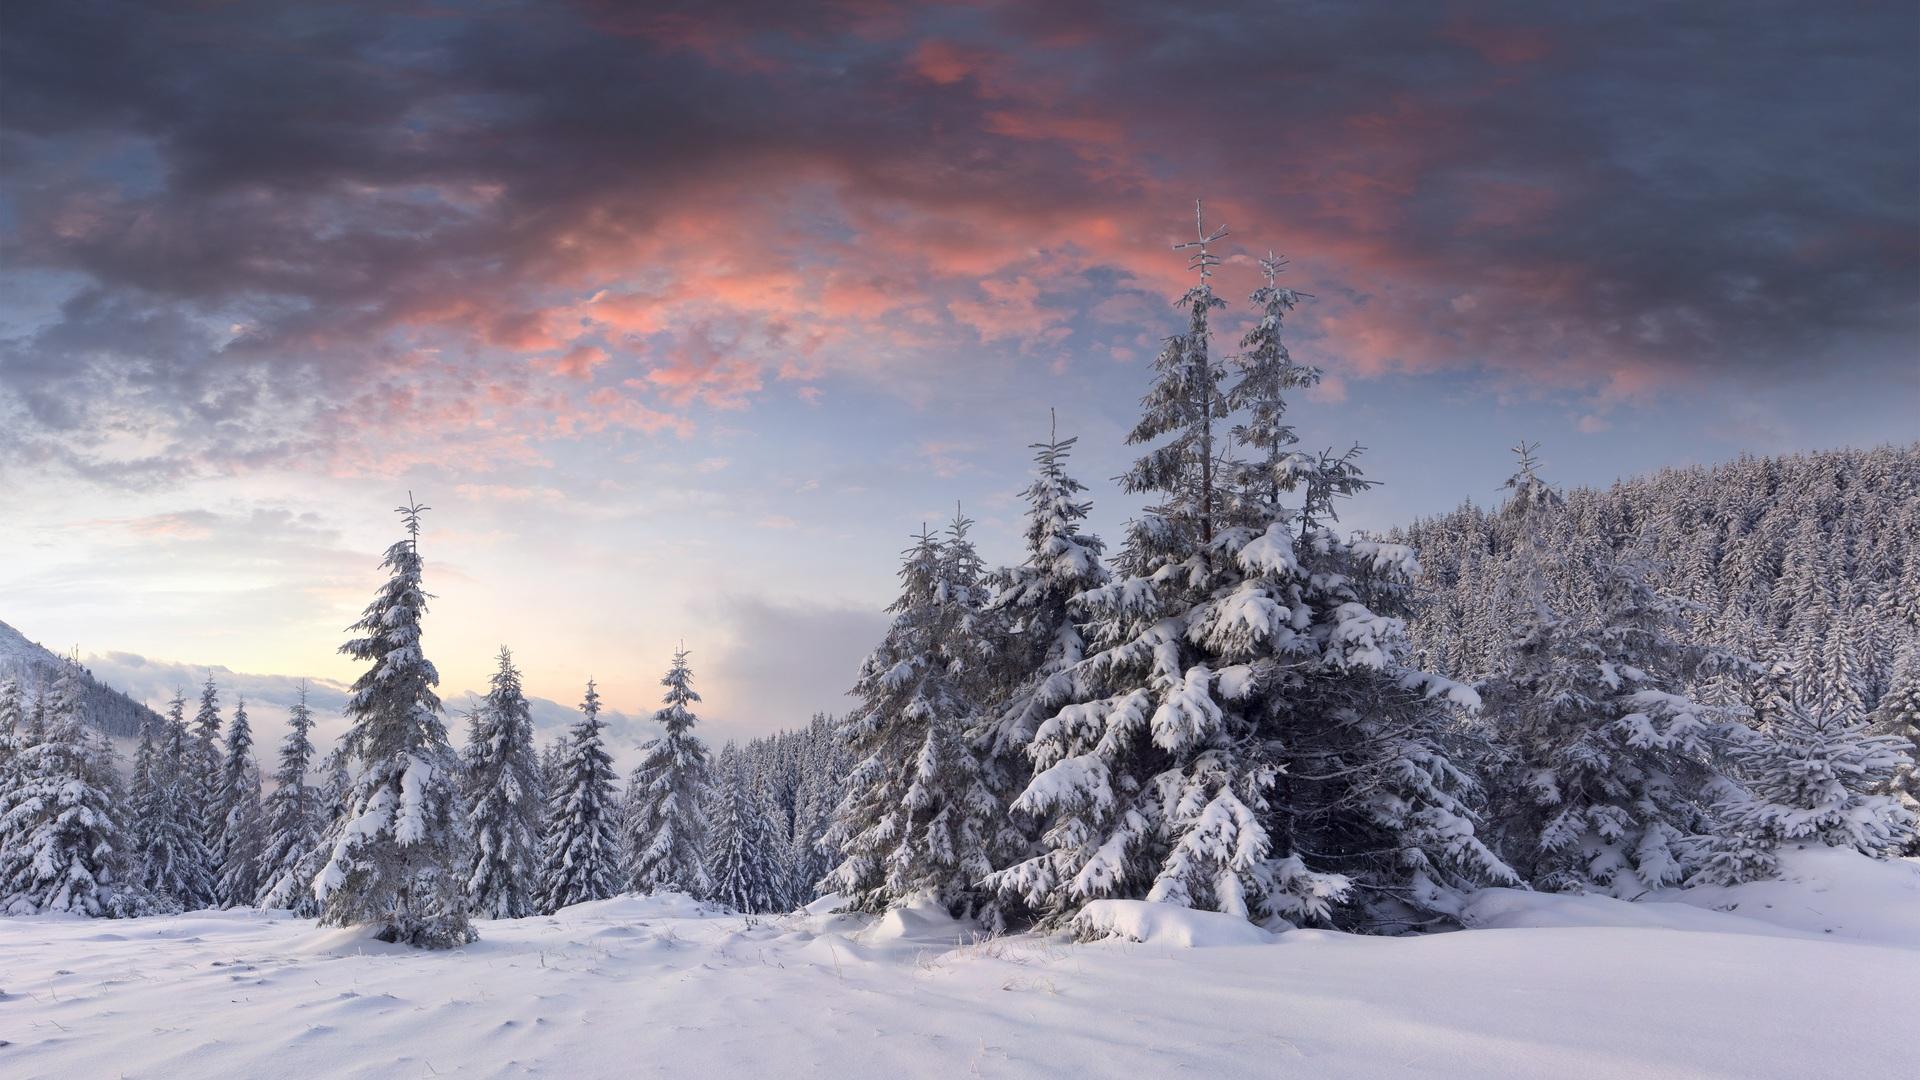 Clouds, Snow, Hills, Dawn, Christmas Tree, Winter, Forest